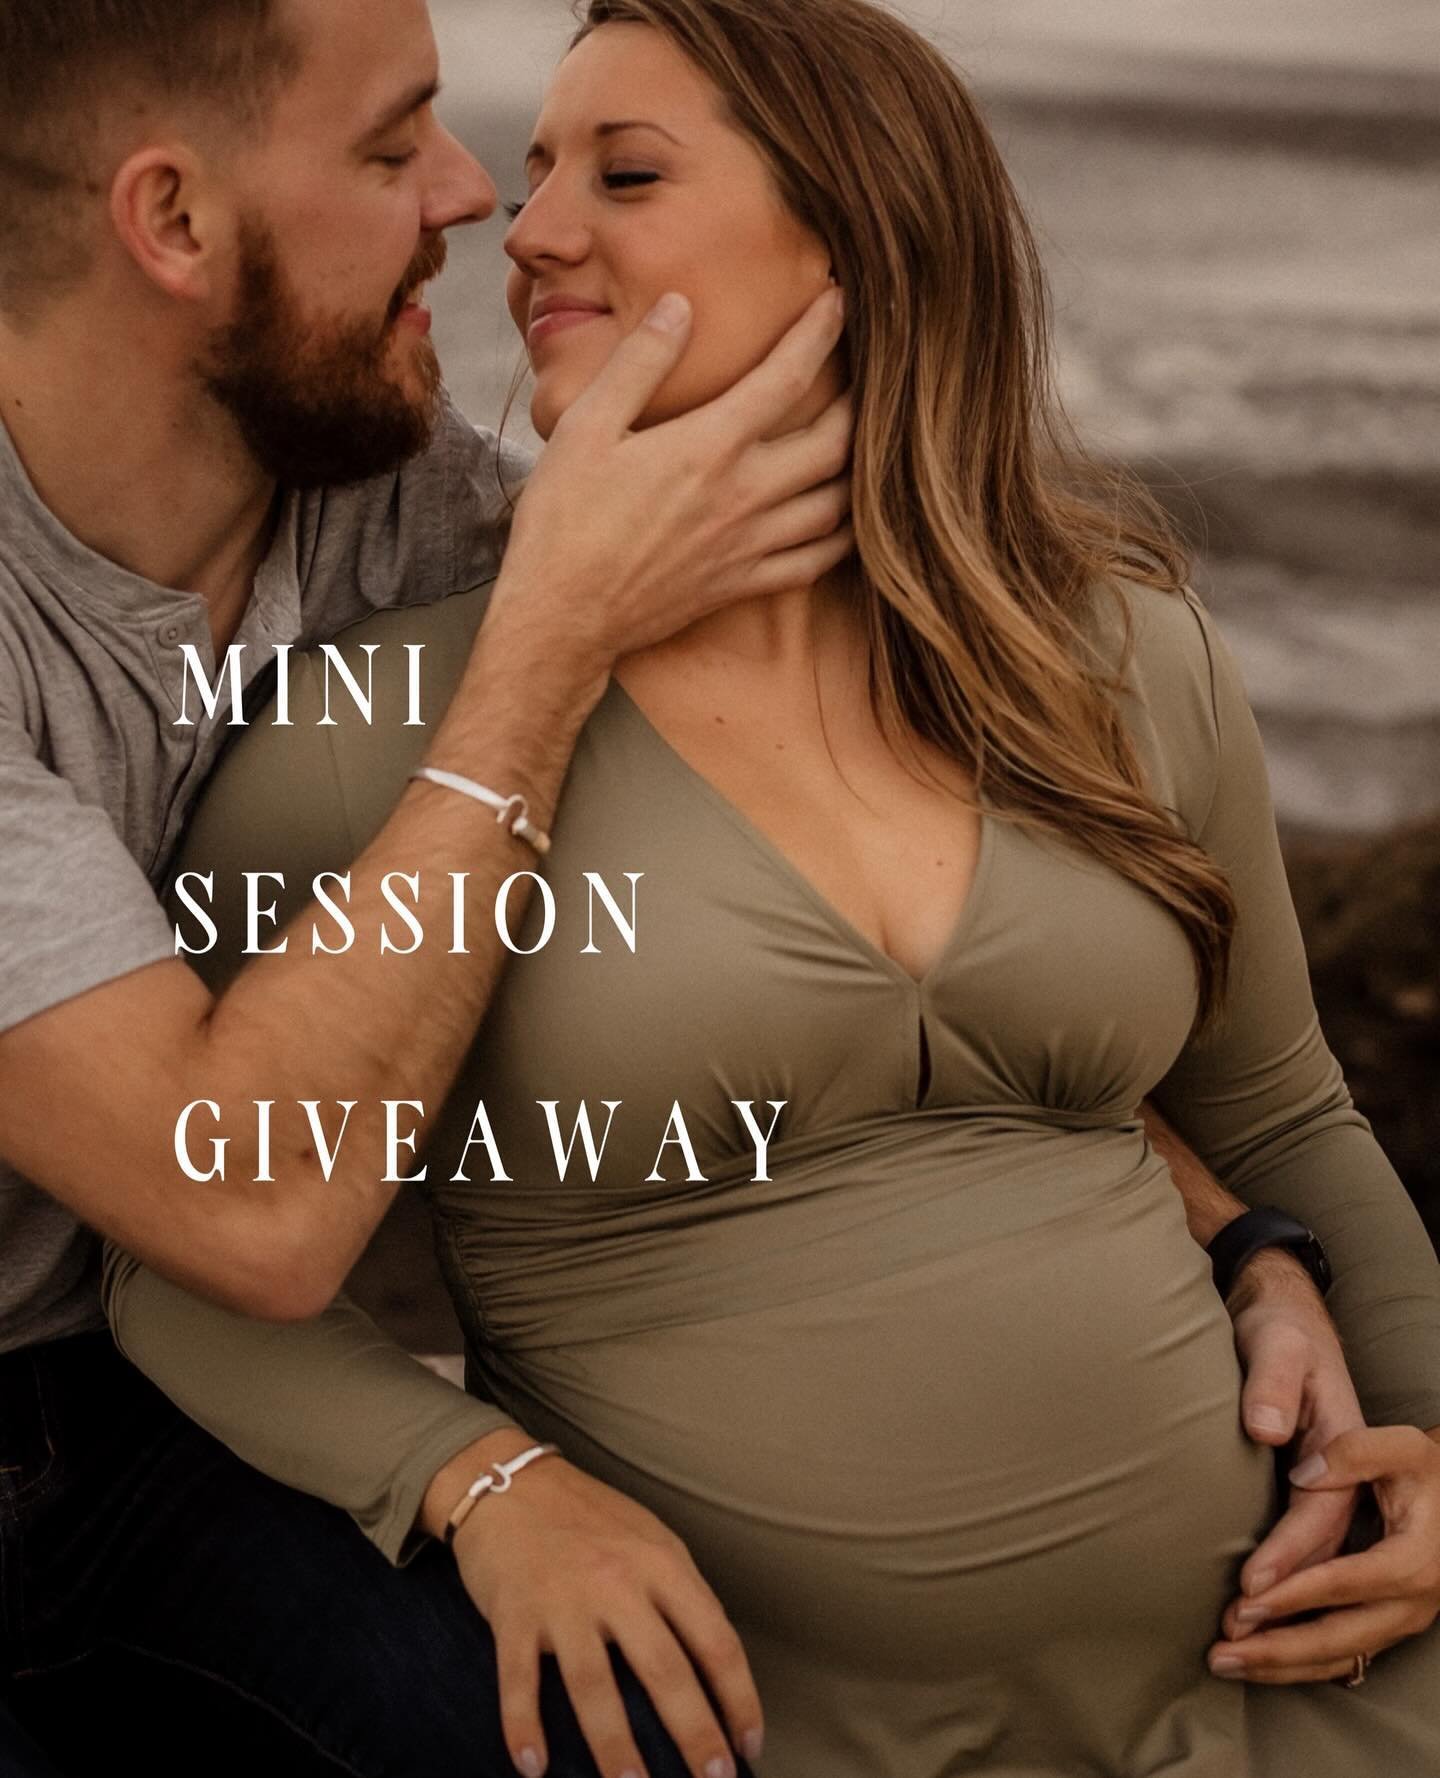 ENTER TO WIN 🏆 Im SO stoked to be giving away a FREE mini portrait session&mdash;includes intimate session, engagement shoot, motherhood, business branding + creative headshots* Follow instructions below to enter 👏🏽 good luck cuties!

1. FOLLOW th